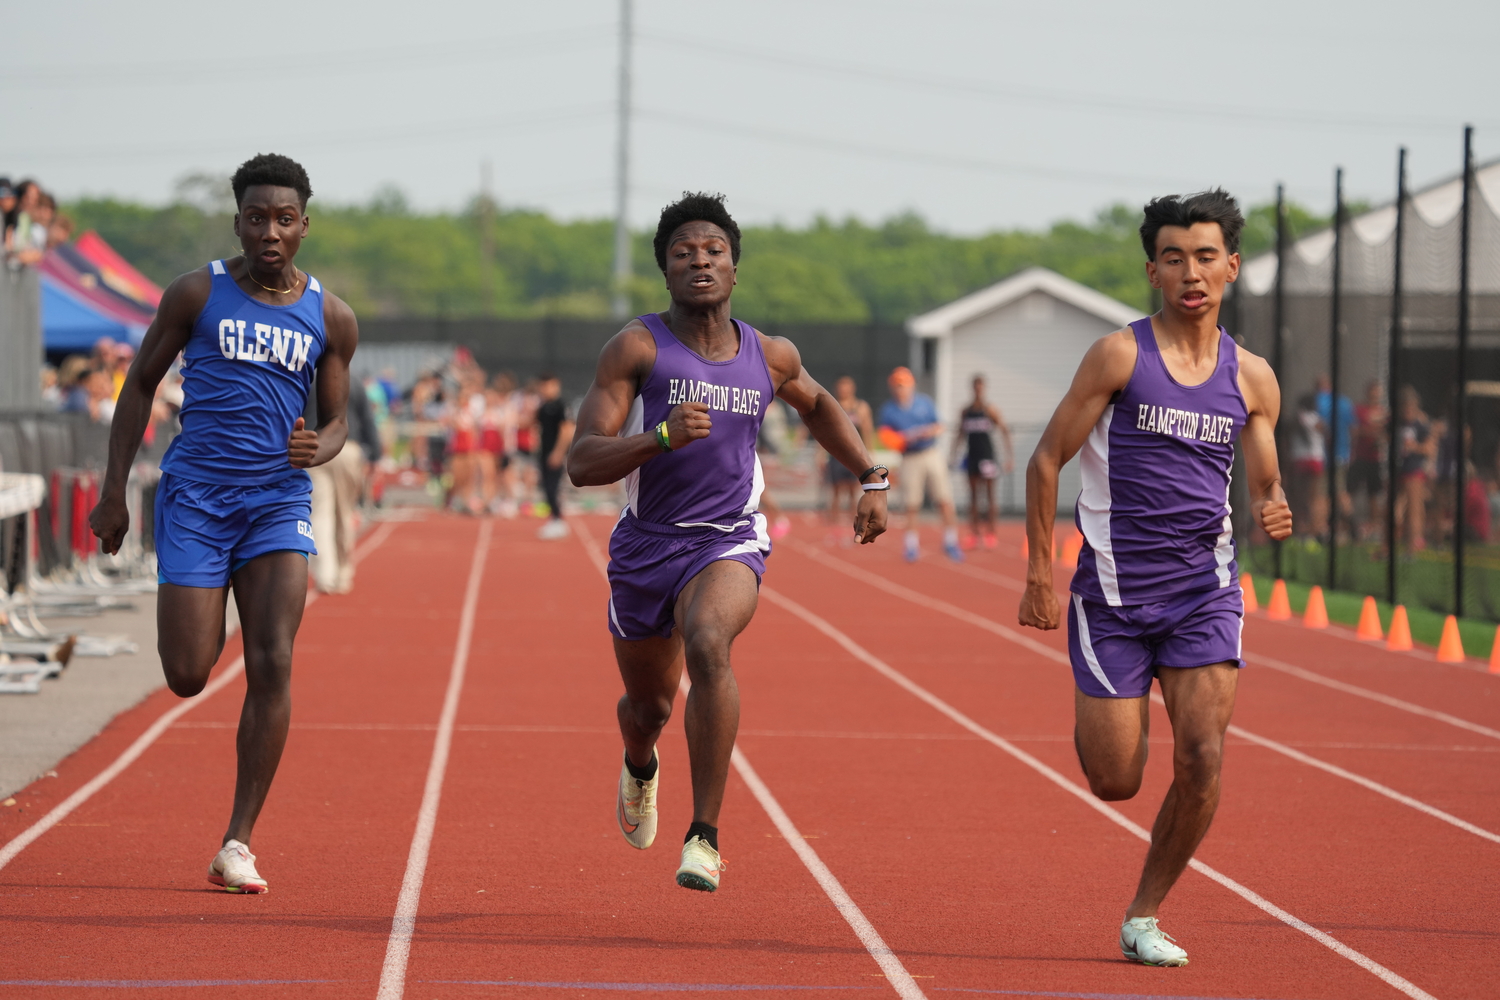 Baymen Charlie Garcia, far right, and Eli Amos placed second and third, respectively, in the 100-meter dash.   RON ESPOSITO